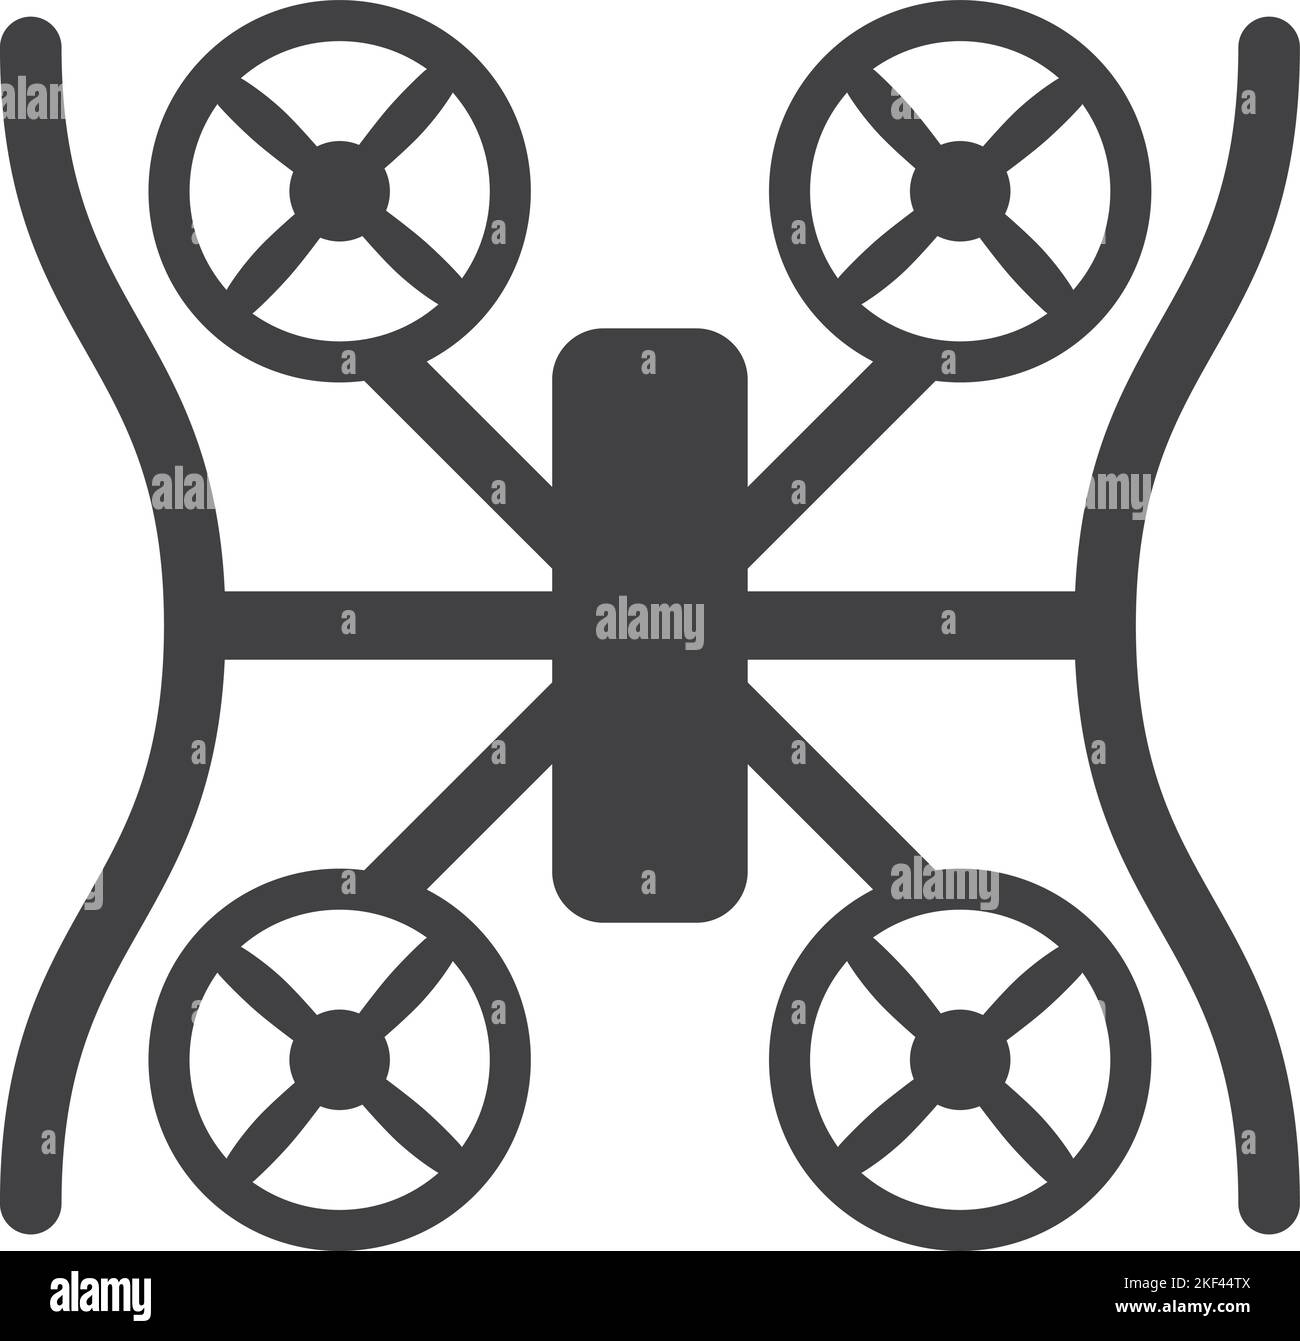 Quadrocopter black icon. Flying remote control aircraft Stock Vector